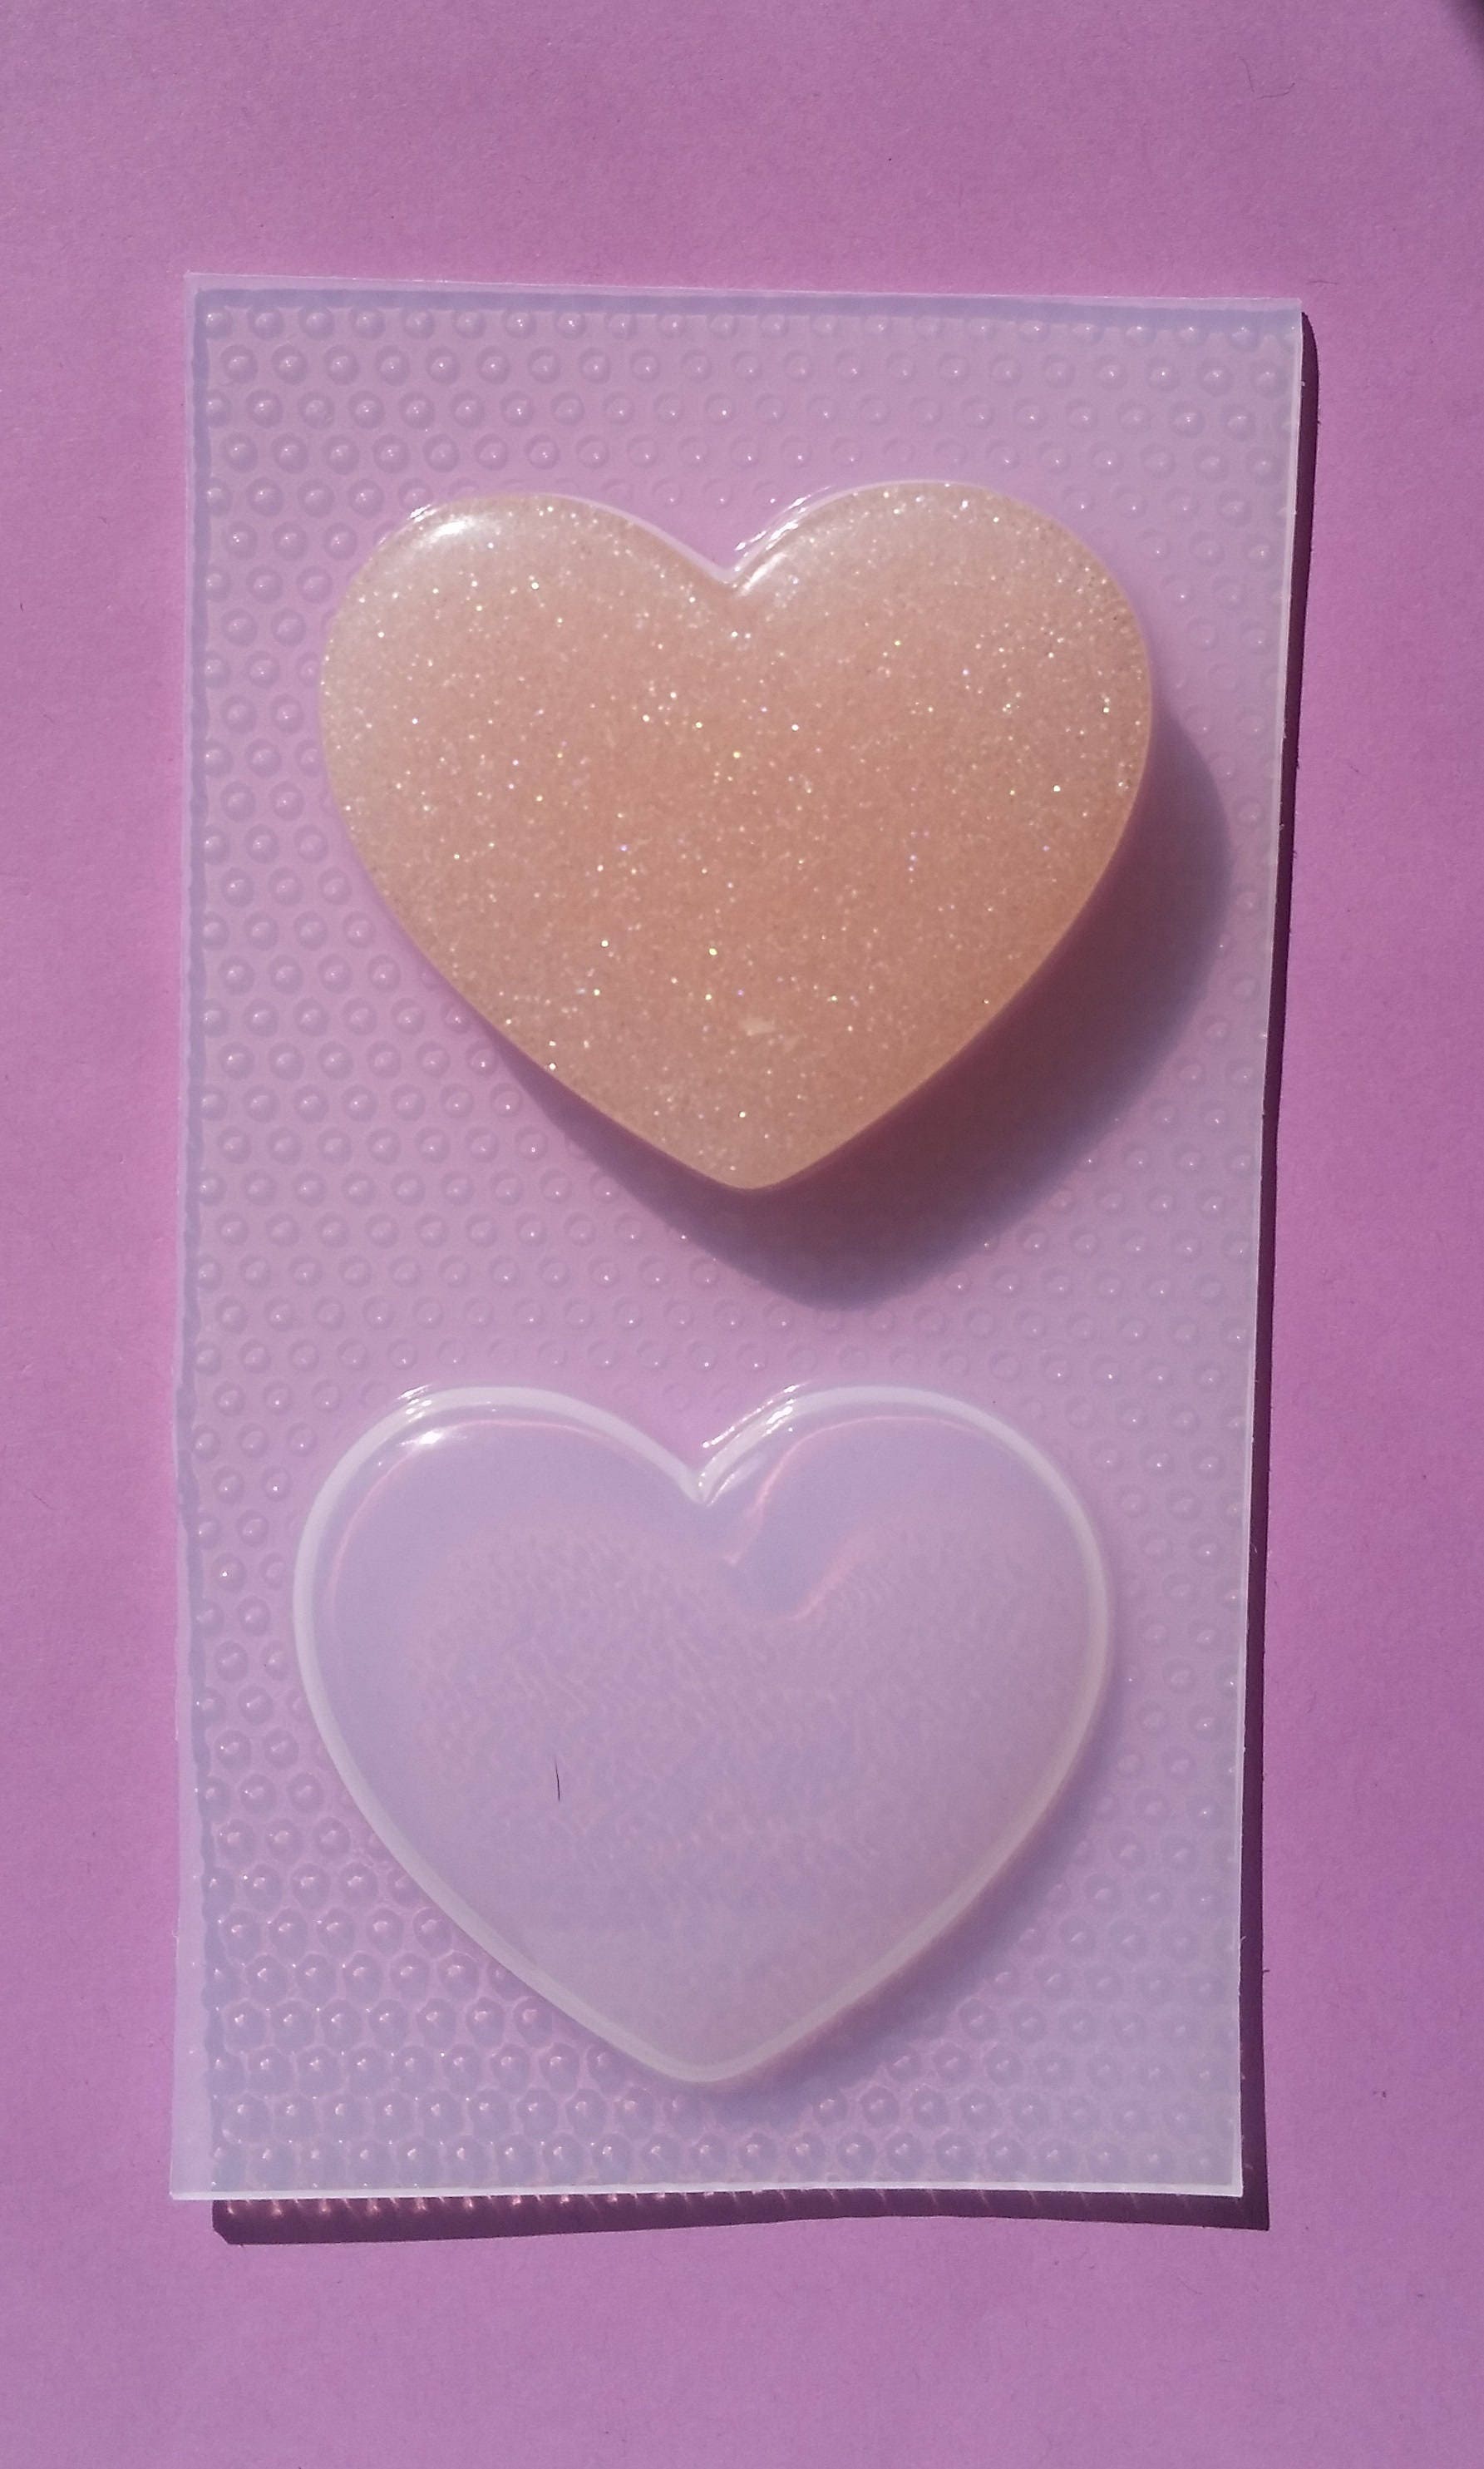 Tiny Flat and Puffy Heart Silicone Mold (12 Cavity) | Resin Shaker Bit  Mould | Kawaii Resin Jewelry DIY | Valentine's Day Craft Supplies